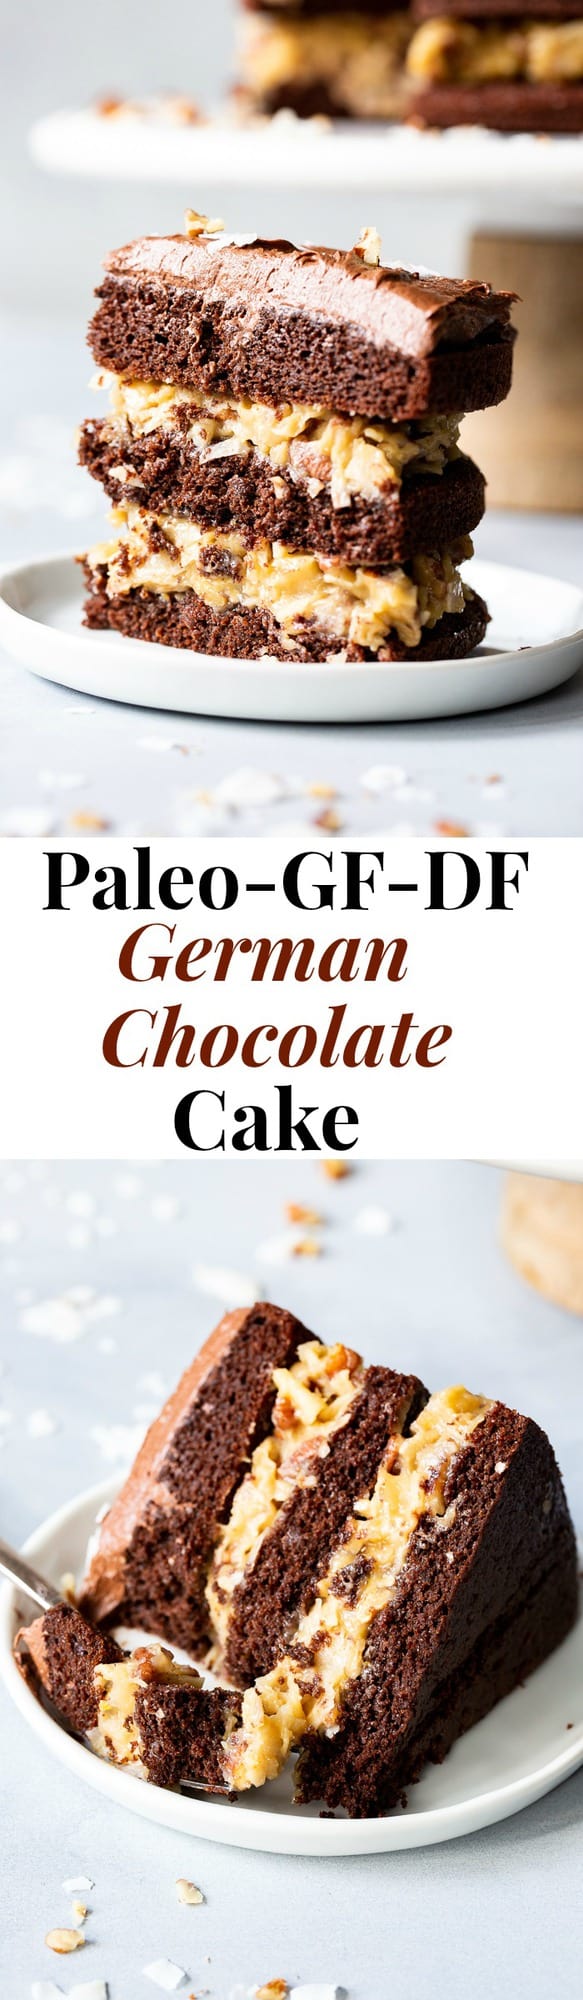 This rich Paleo German Chocolate Cake has a classic coconut pecan filling between tender grain free chocolate cake layers, and is topped with a dairy-free, refined sugar free chocolate frosting.  A showstopper for any gathering, this healthy German Chocolate Cake will become a family favorite!